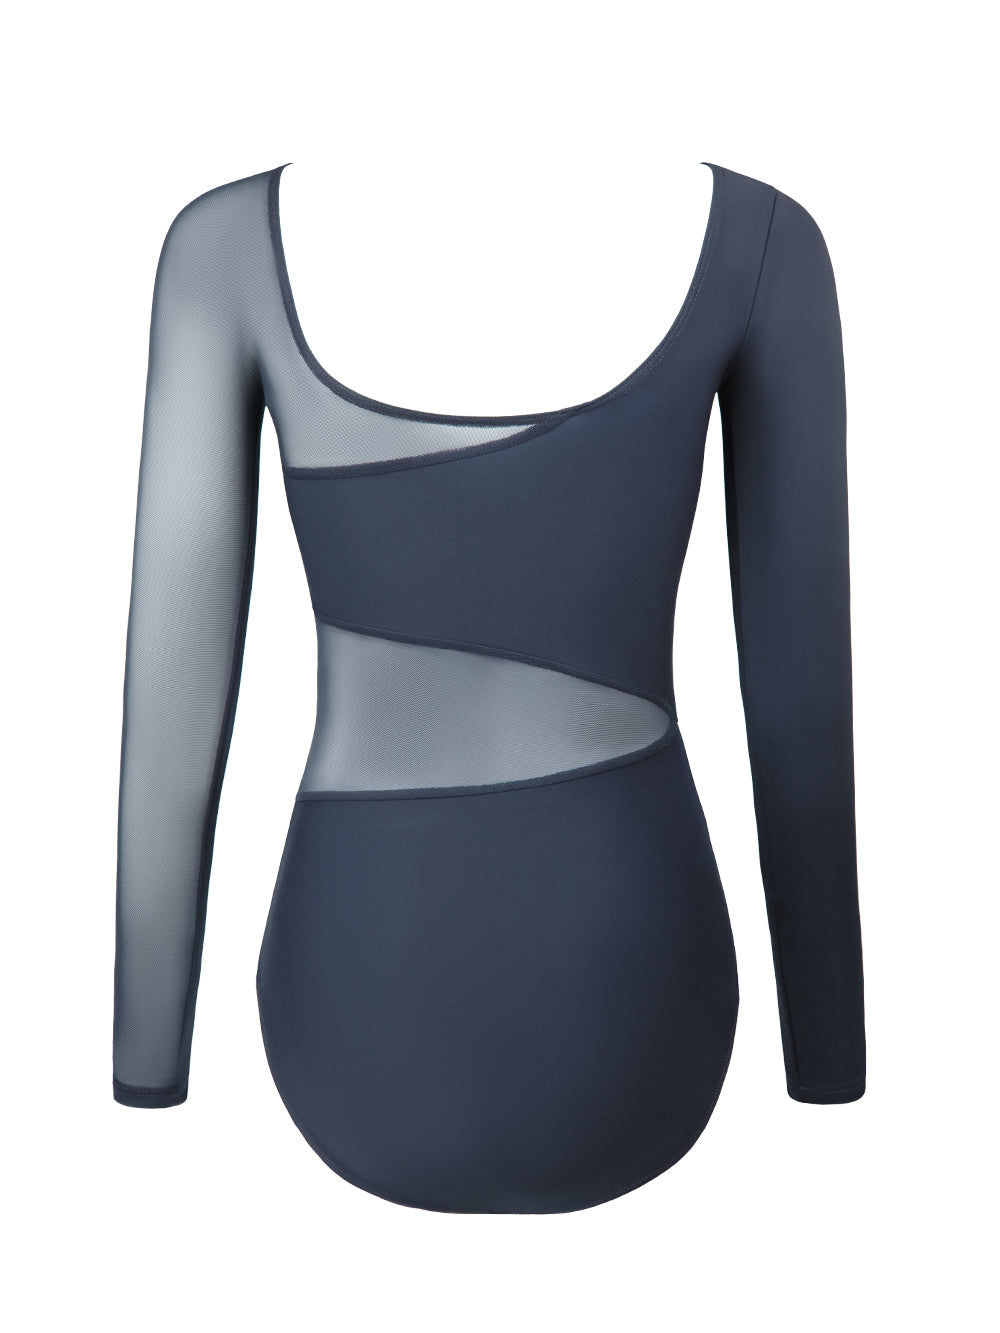 Amelie Leotard - Mesh, Printed or Solid Fabric with Long Sleeves